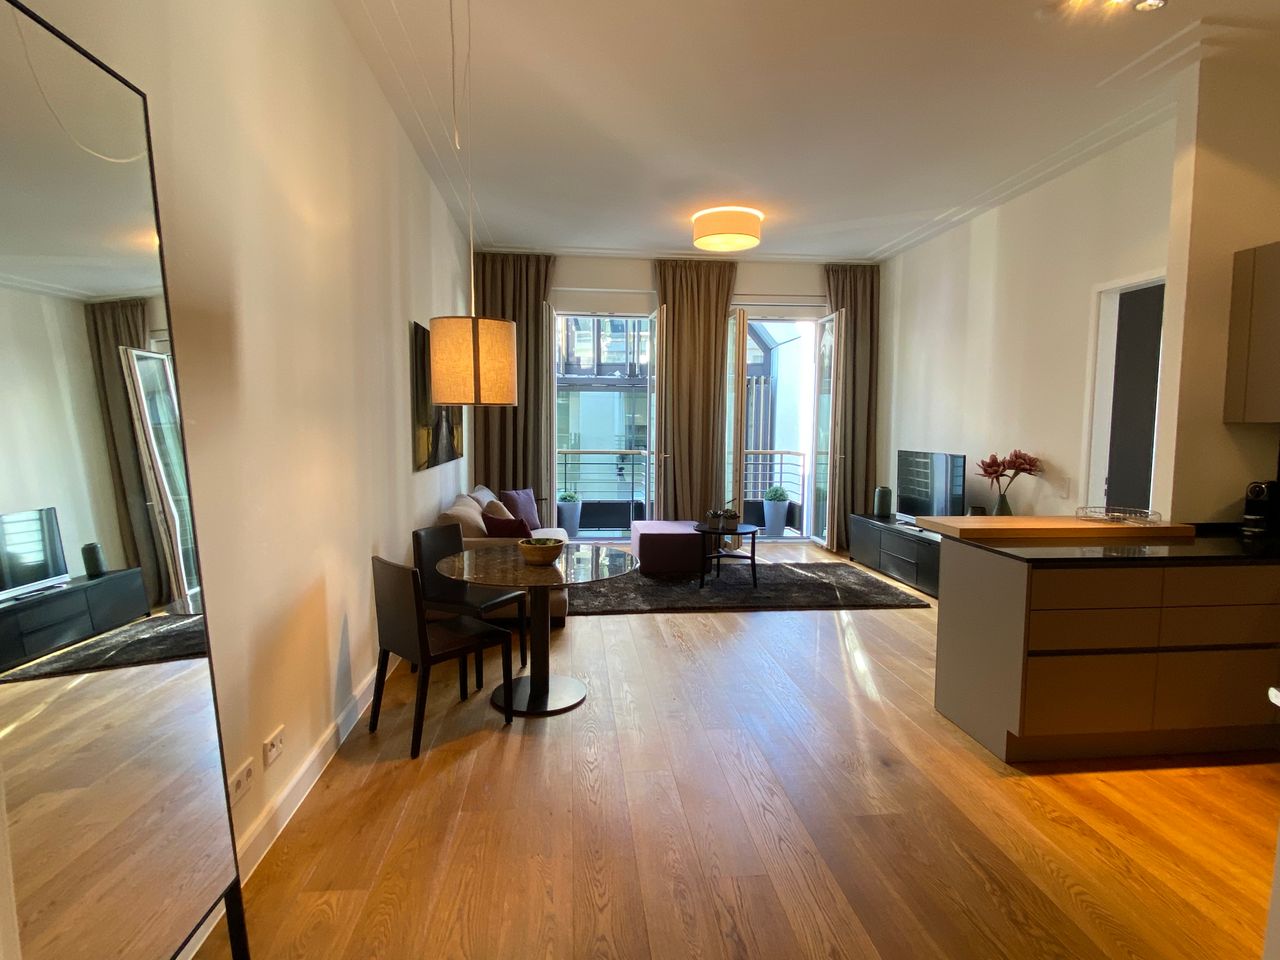 Premium apartment with new and high quality equipment in the heart of Düsseldorf